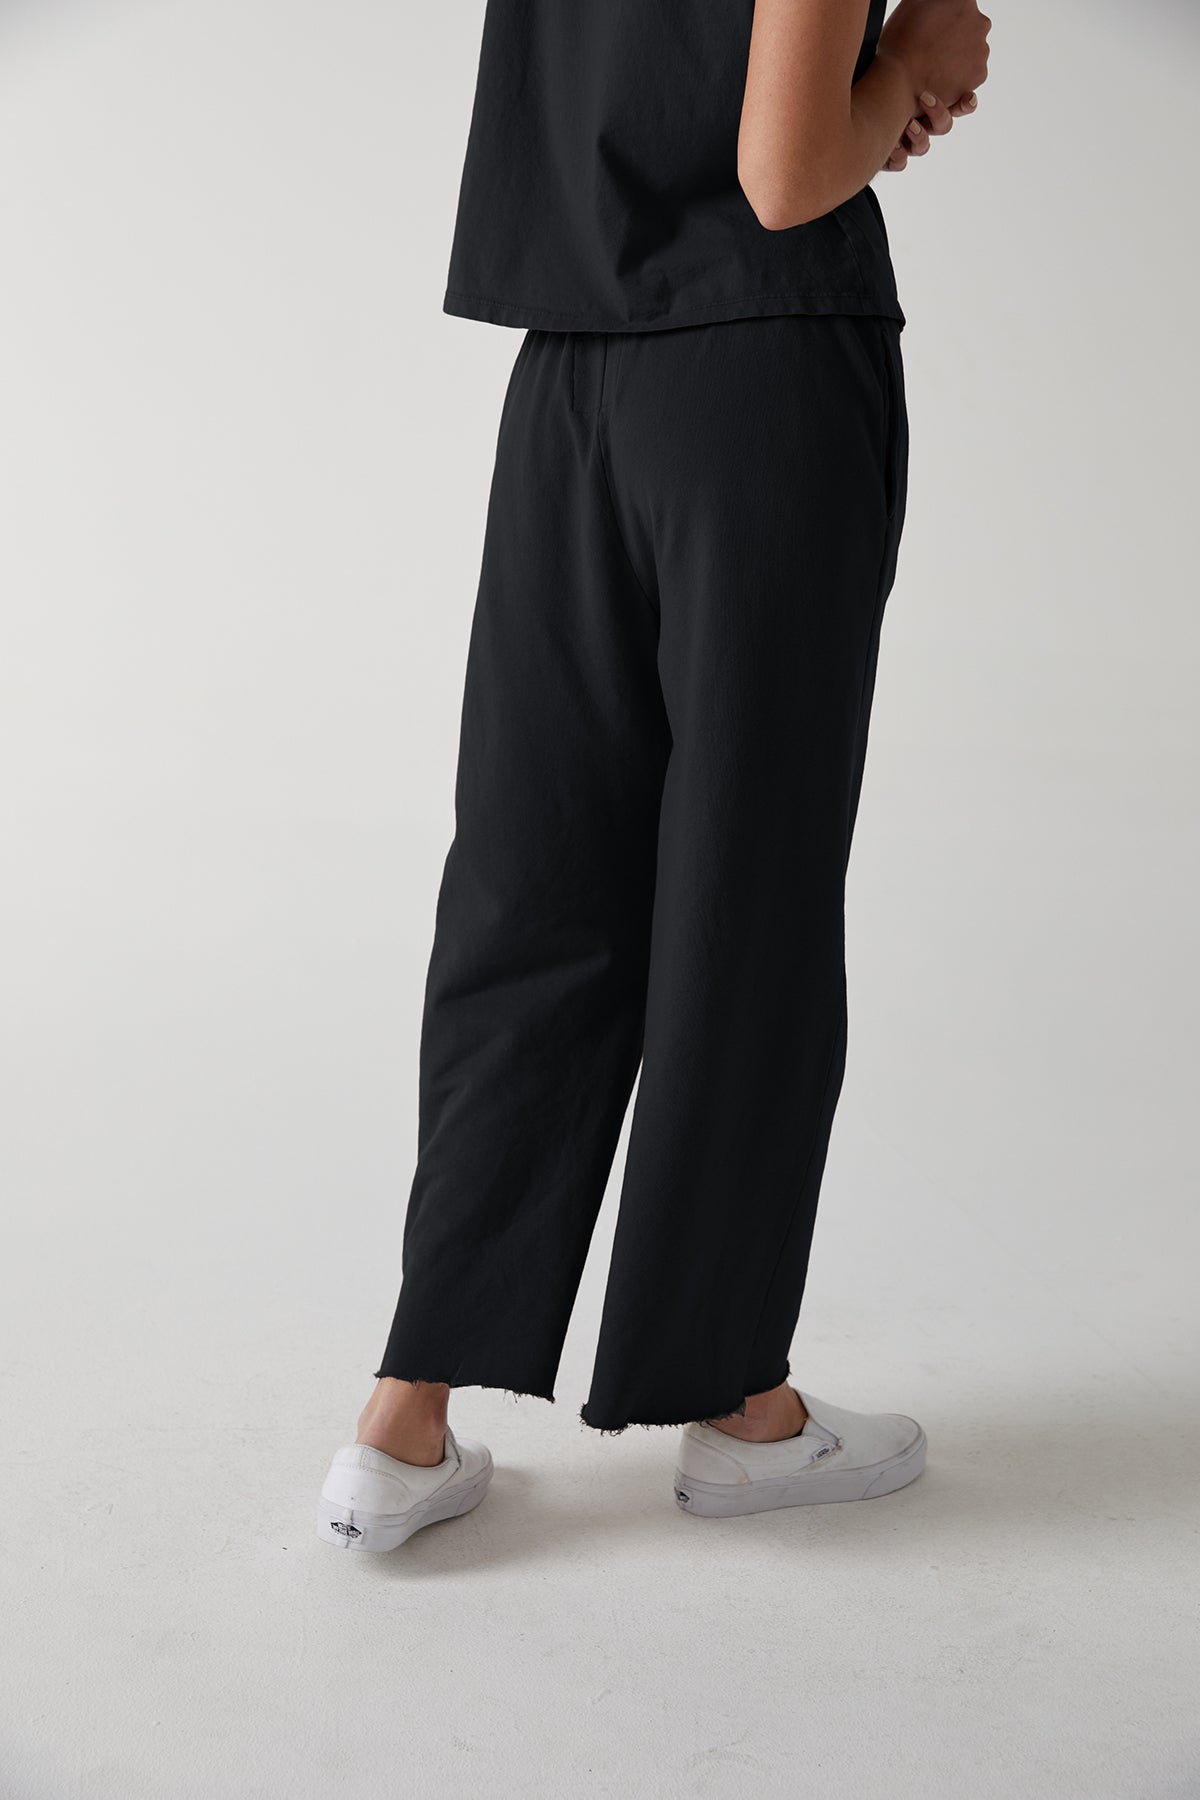 a woman wearing black Montecito sweatpants by Velvet by Jenny Graham and white sneakers.-24331160780993